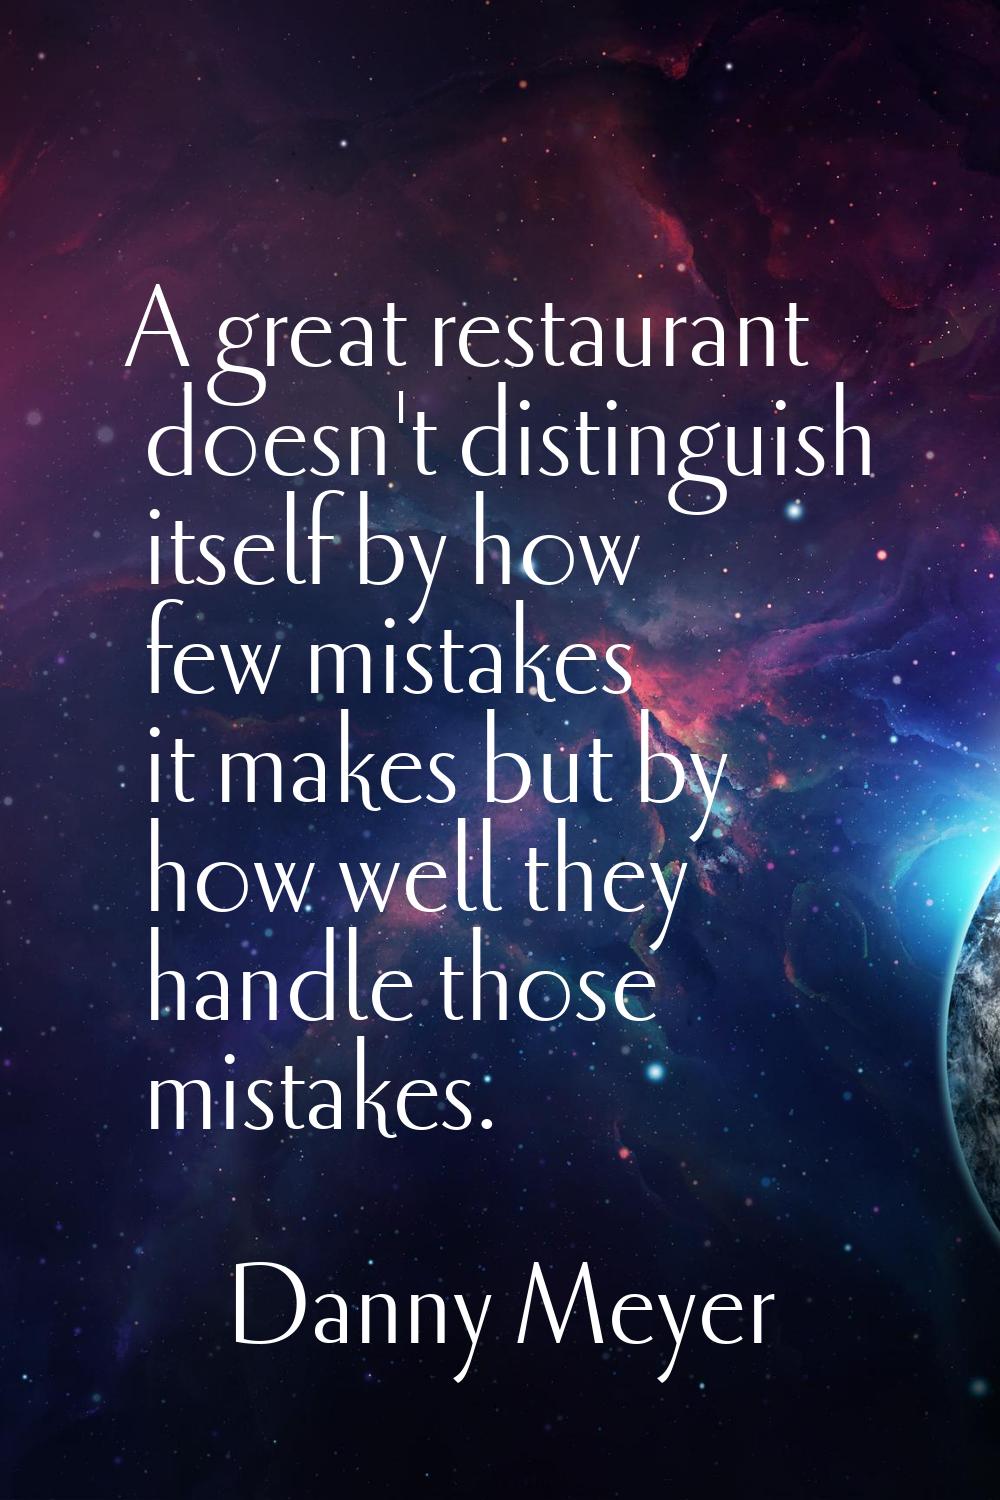 A great restaurant doesn't distinguish itself by how few mistakes it makes but by how well they han